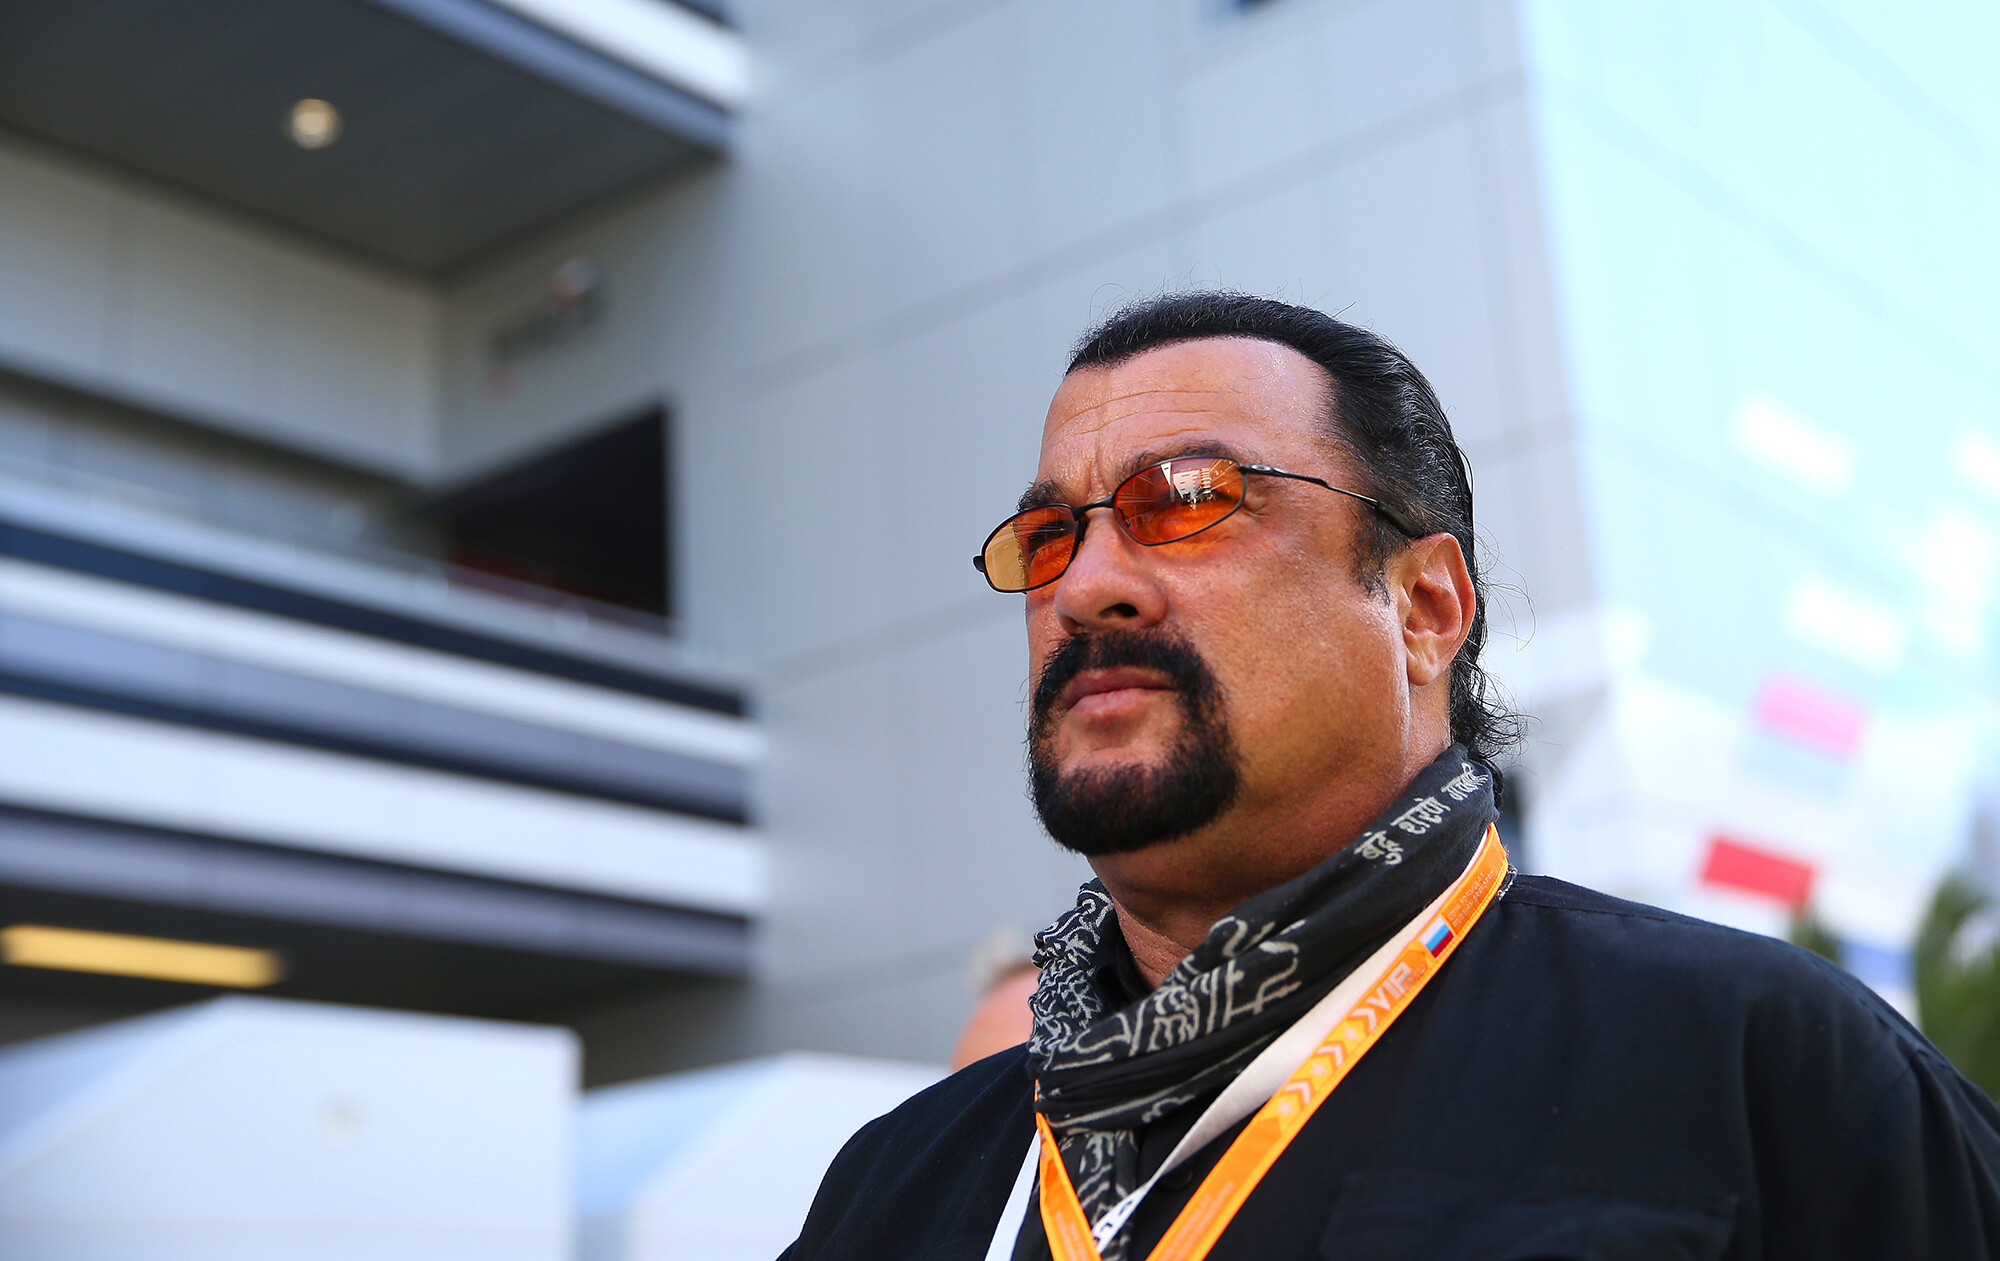 Steven Seagal: Martial arts enthusiast, Best known for producing and starring in action movies, CPO Casey Ryback. 2000x1270 HD Background.